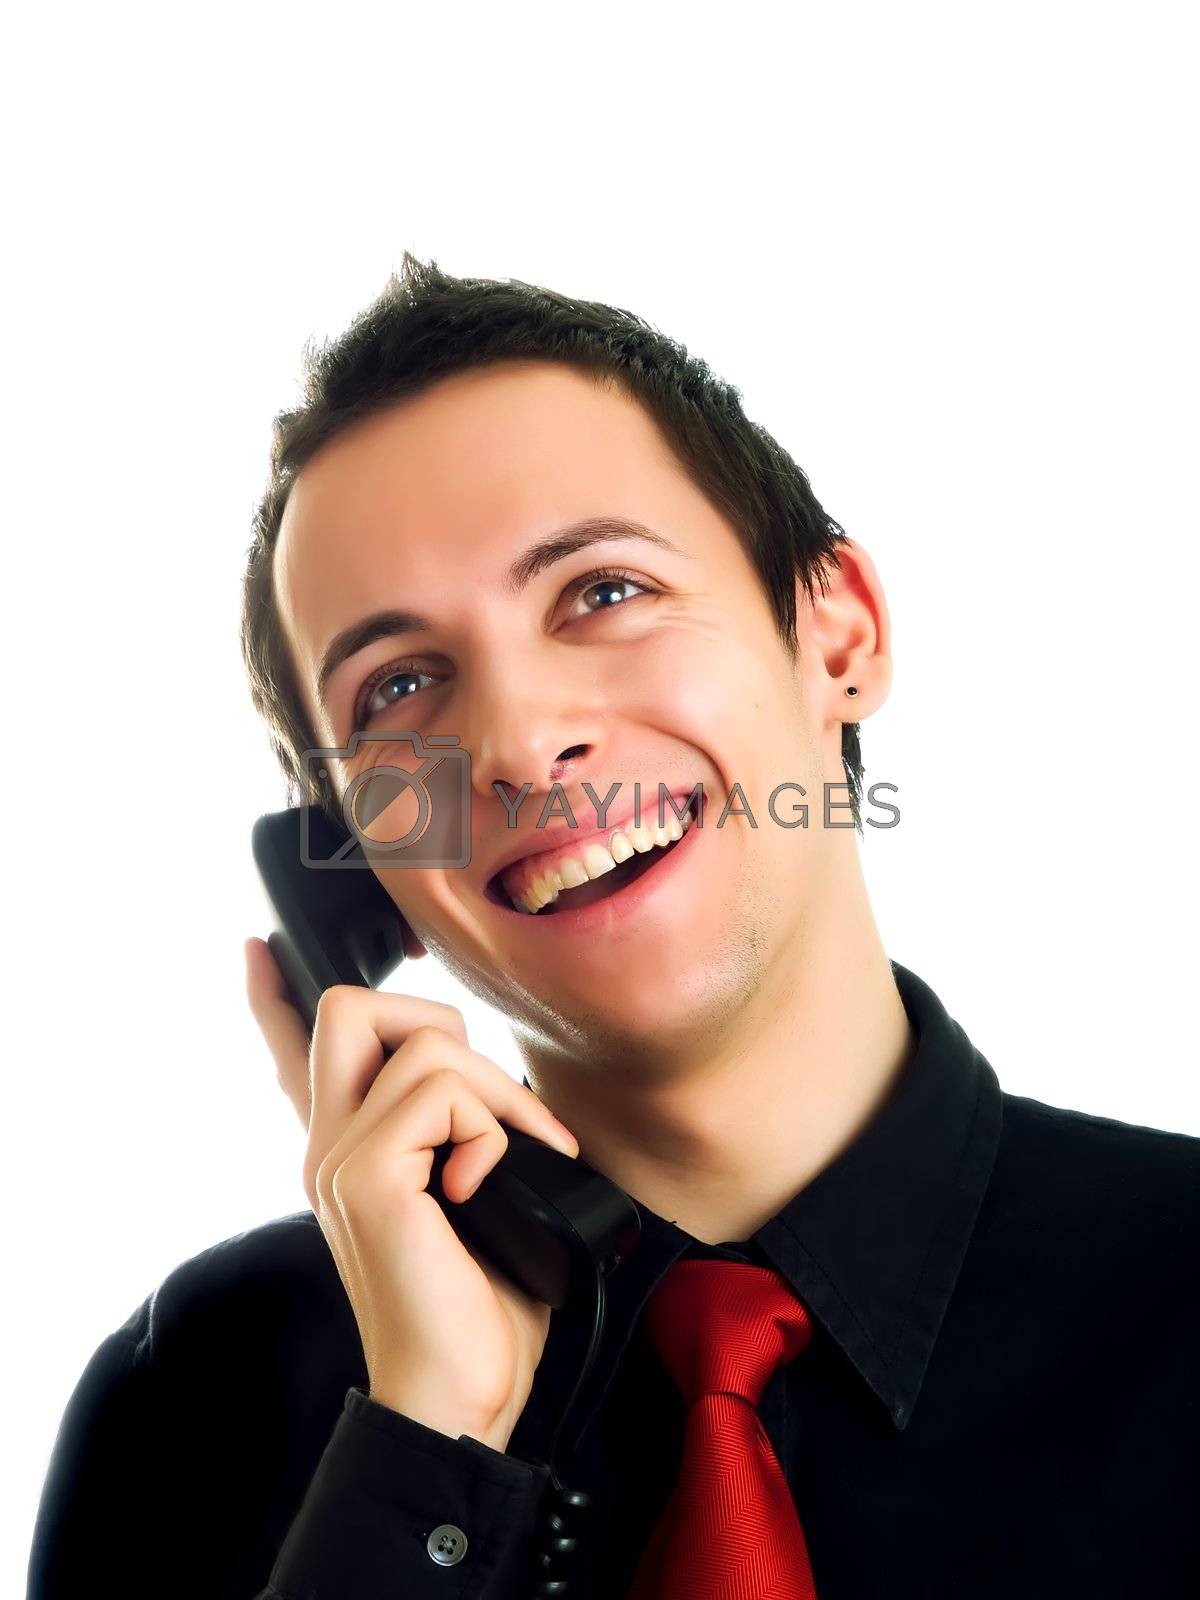 Royalty free image of Phone call by henrischmit